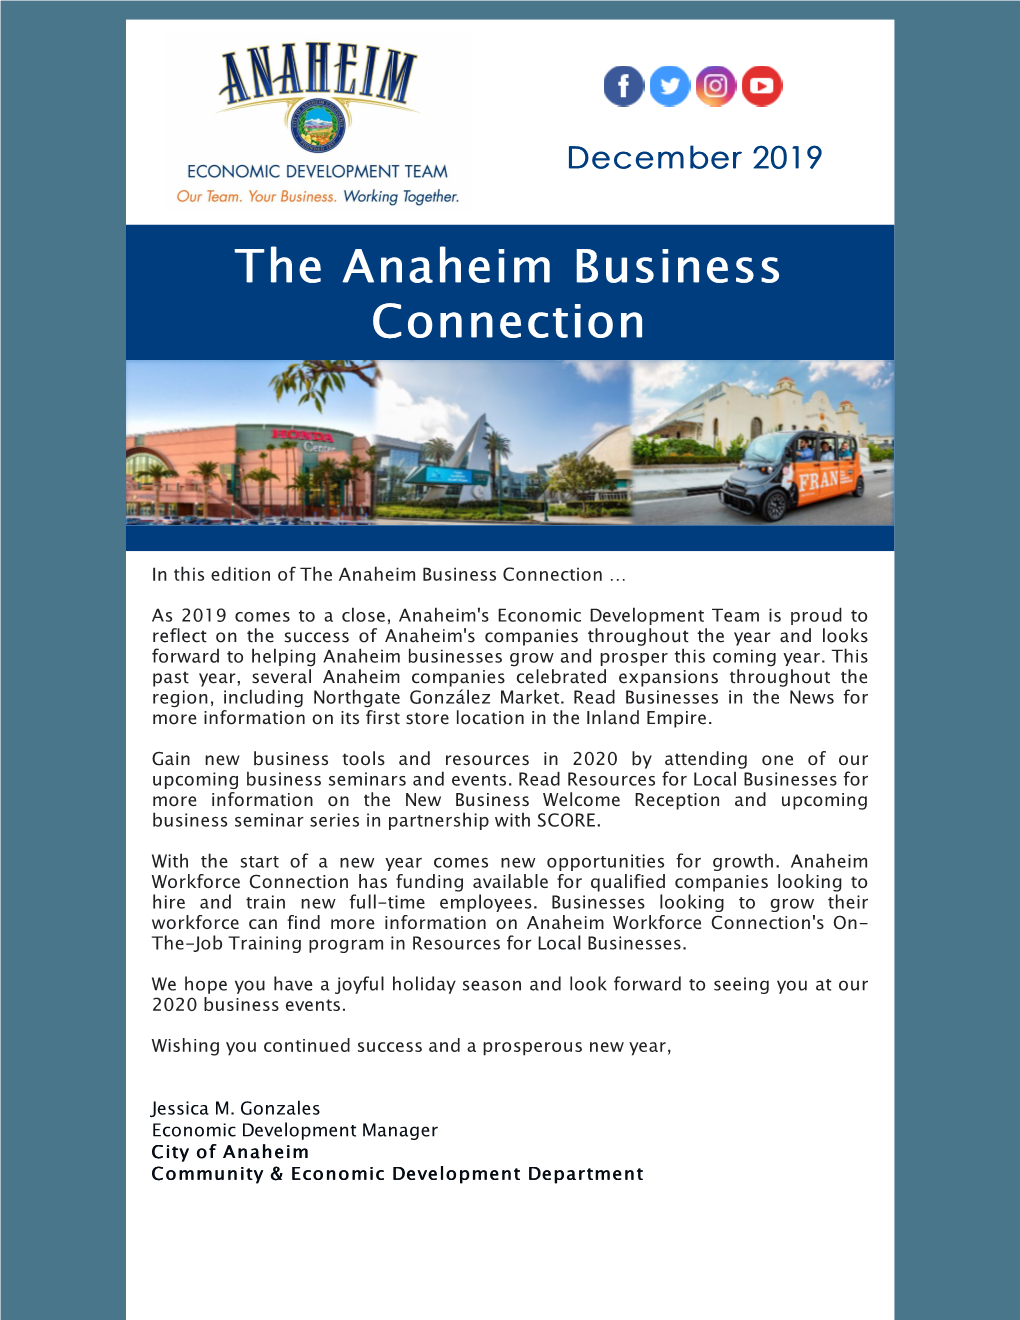 The Anaheim Business Connection